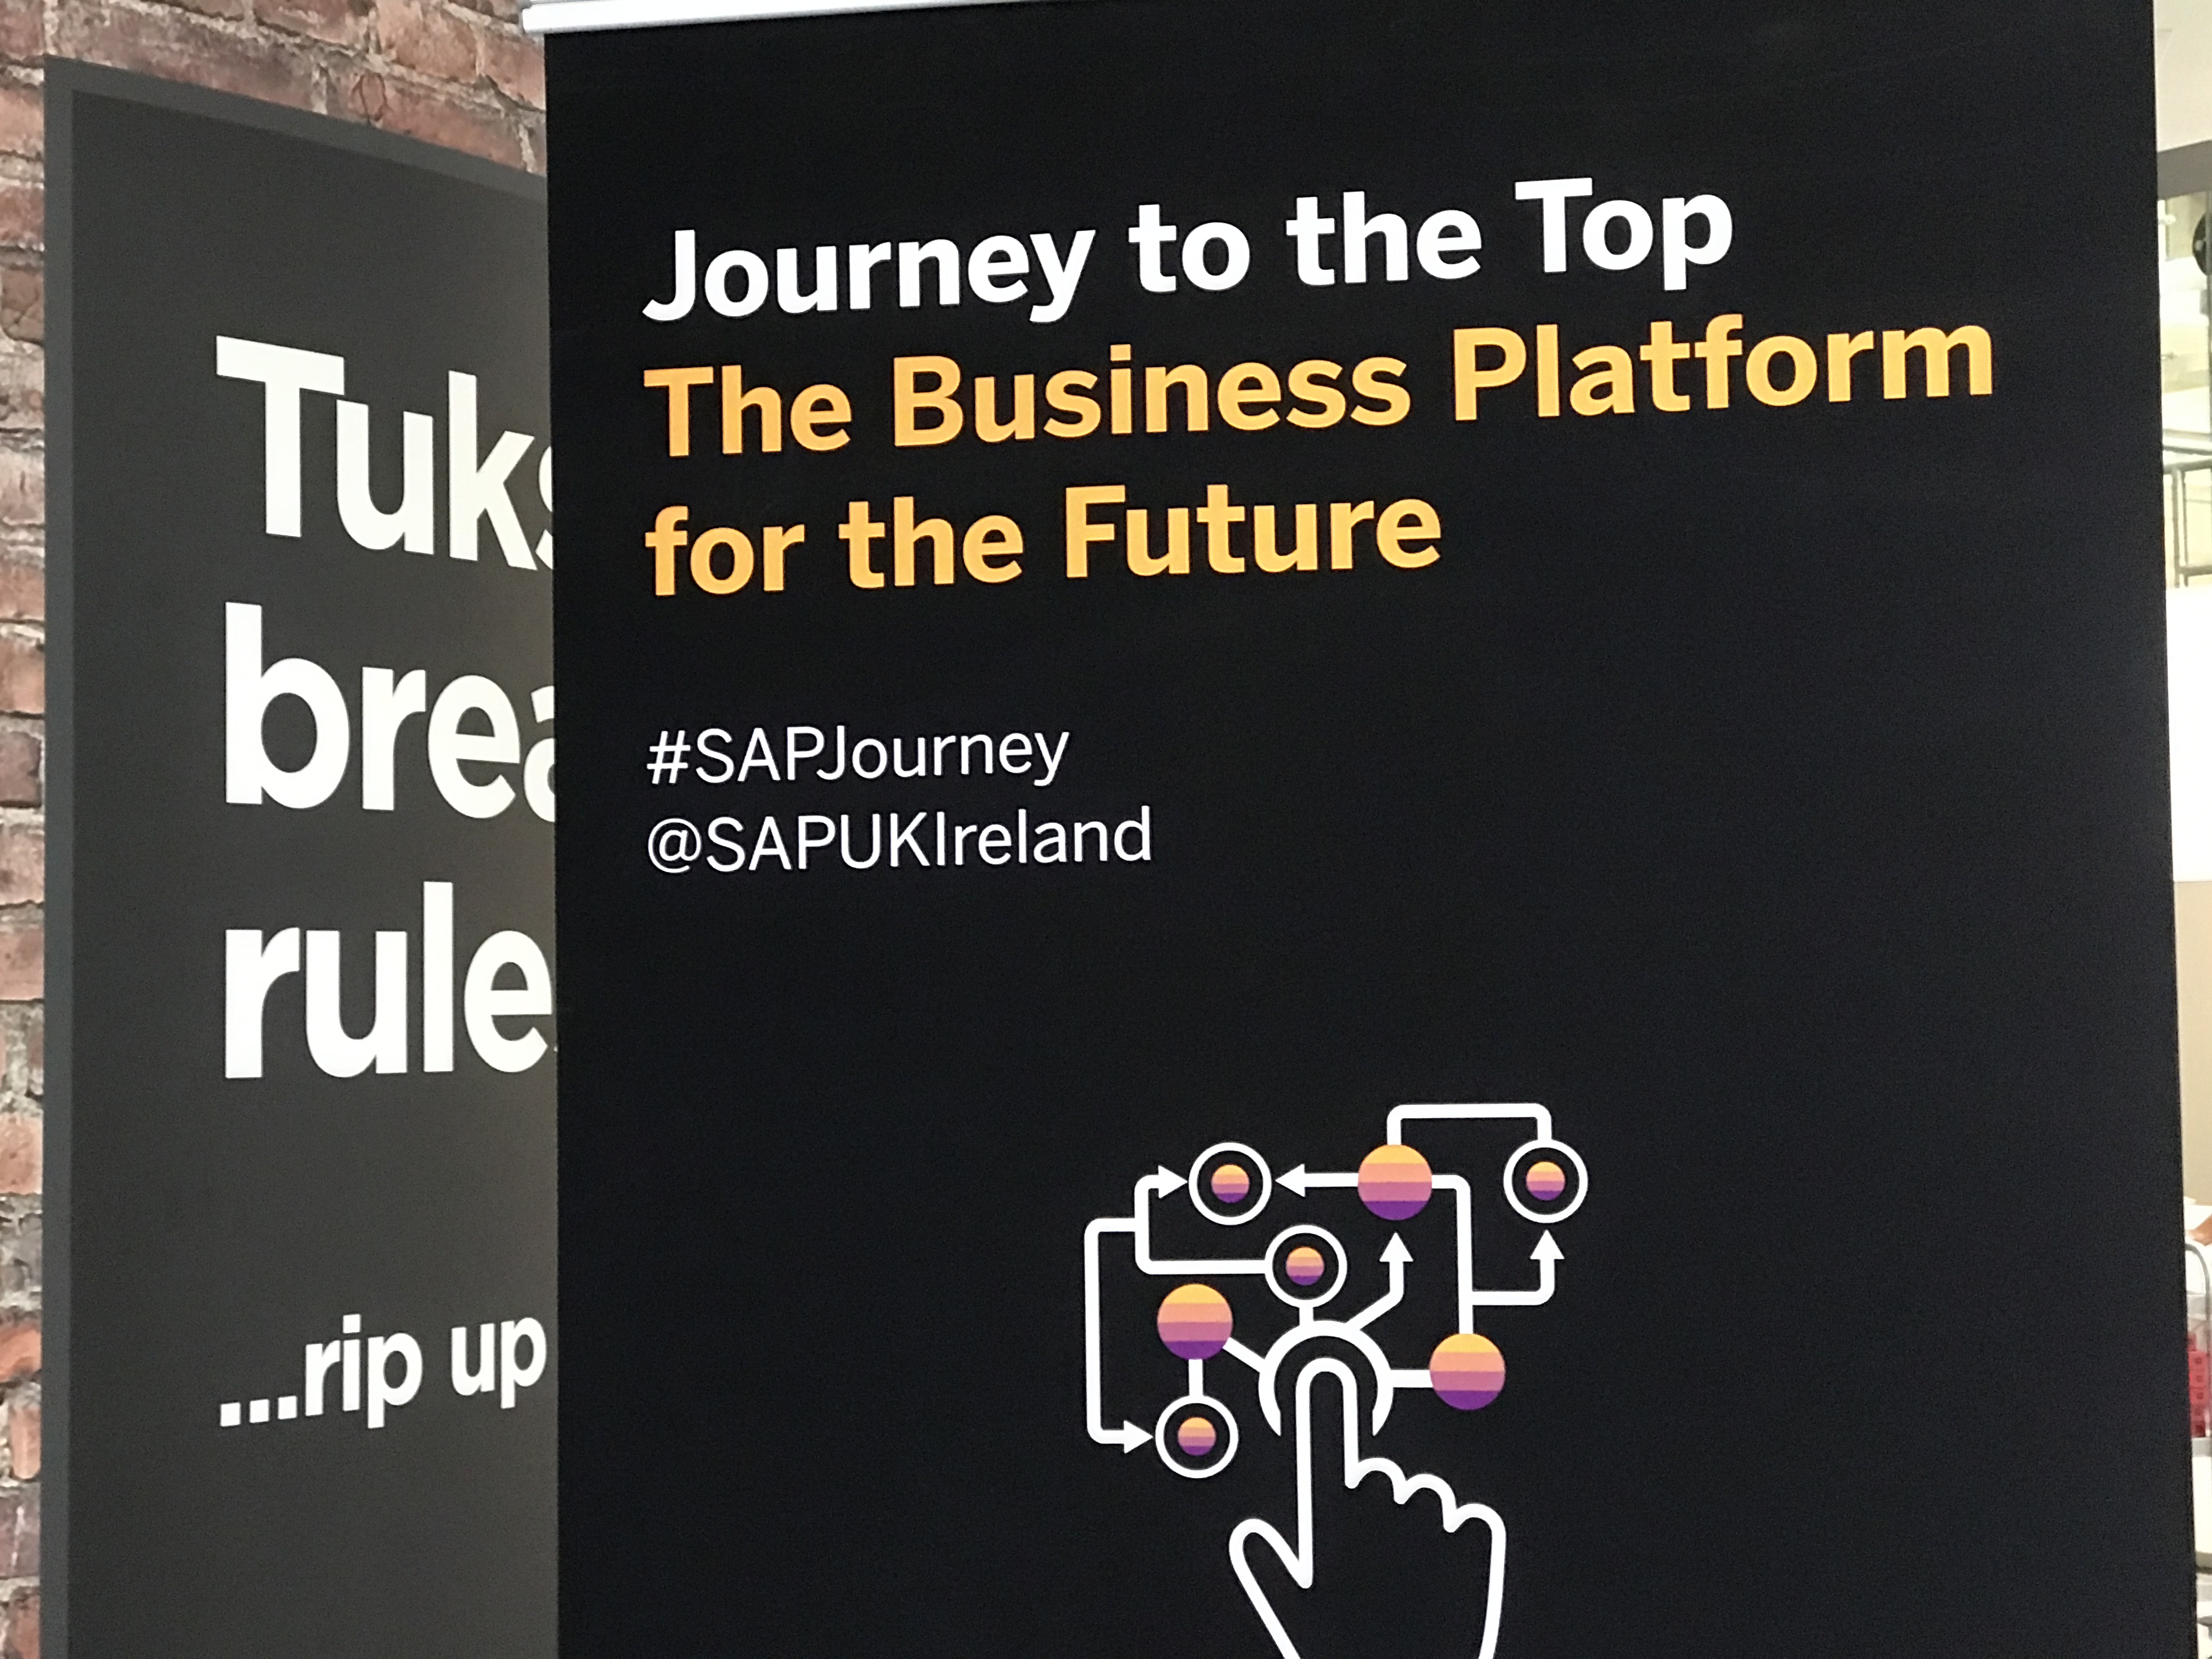 Lessons learned from the SAP UK Business Technology Platform event